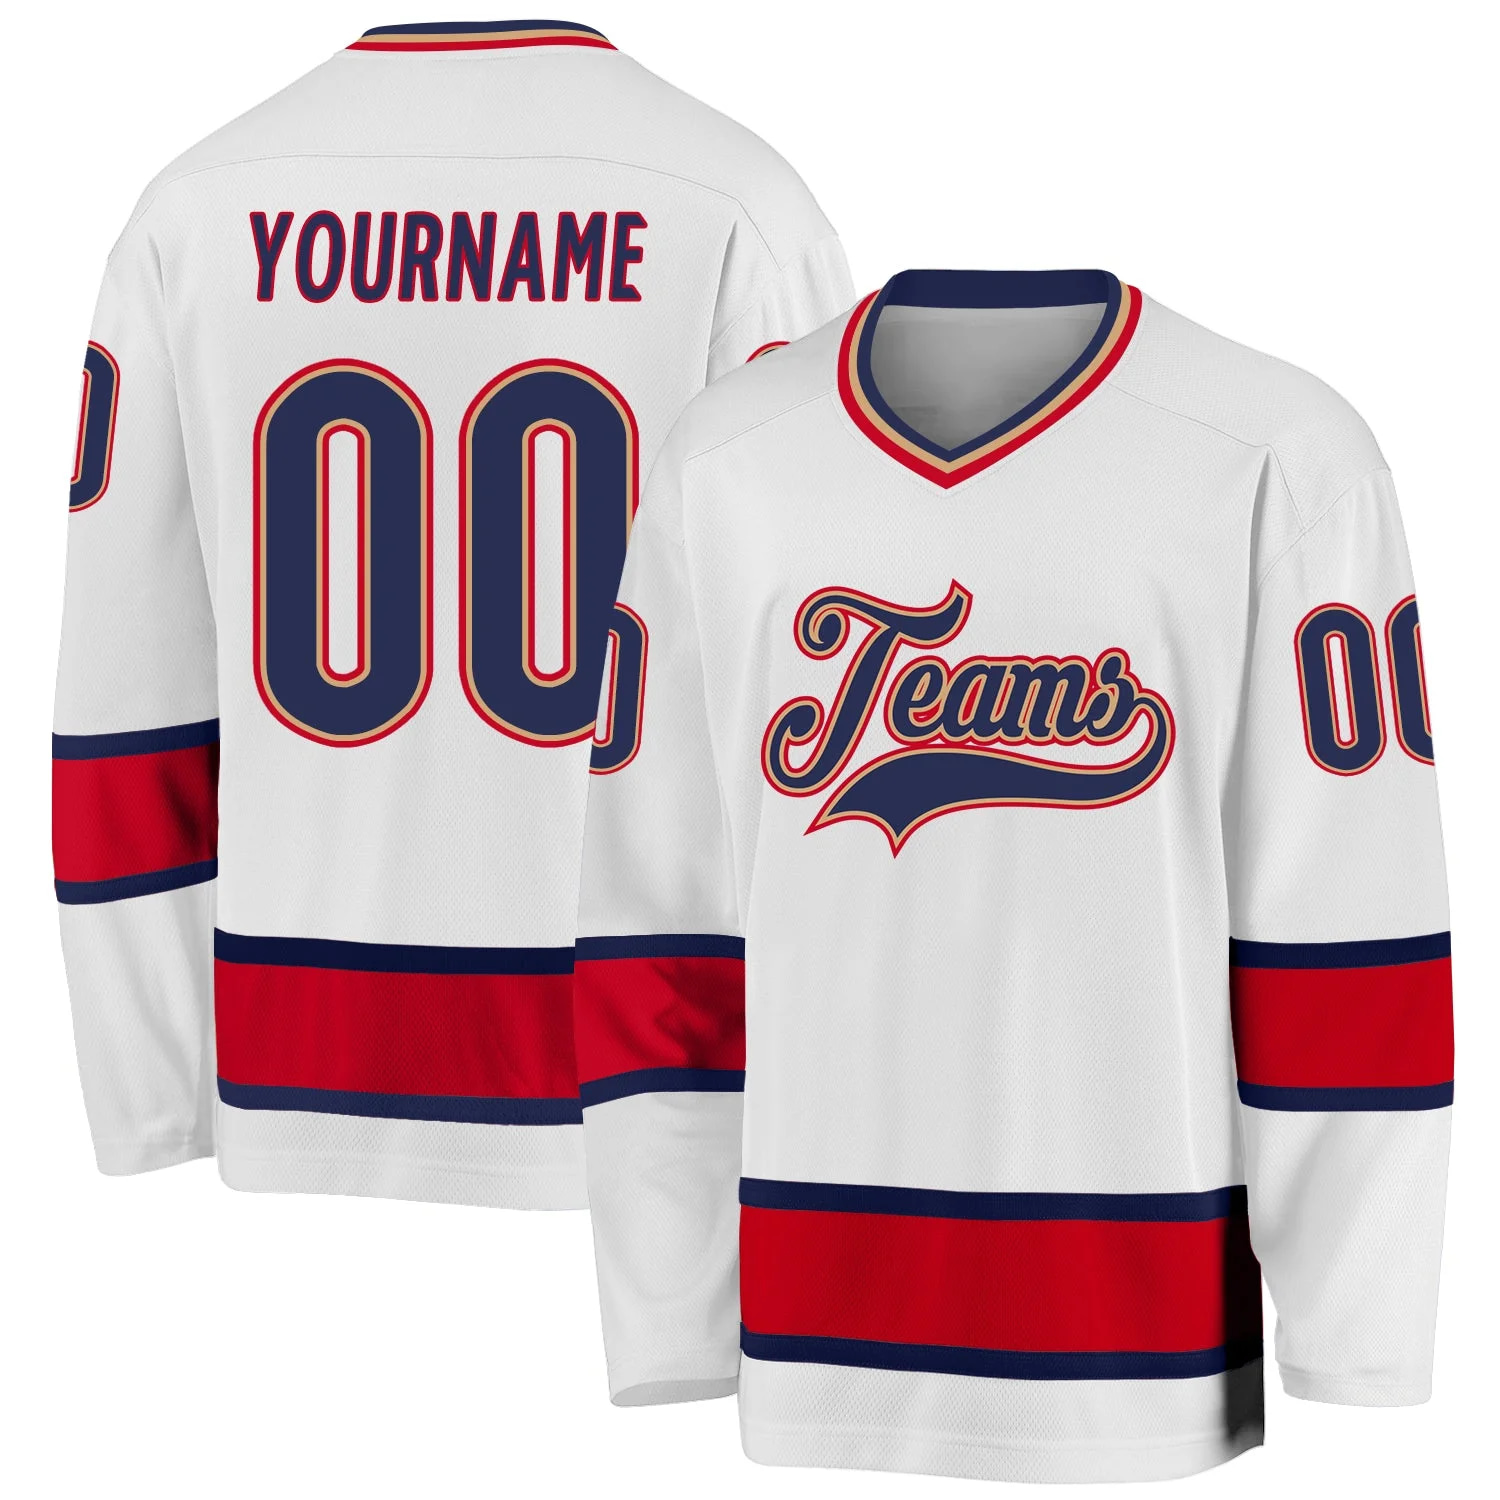 Stitched And Print White Navy-red Hockey Jersey Custom